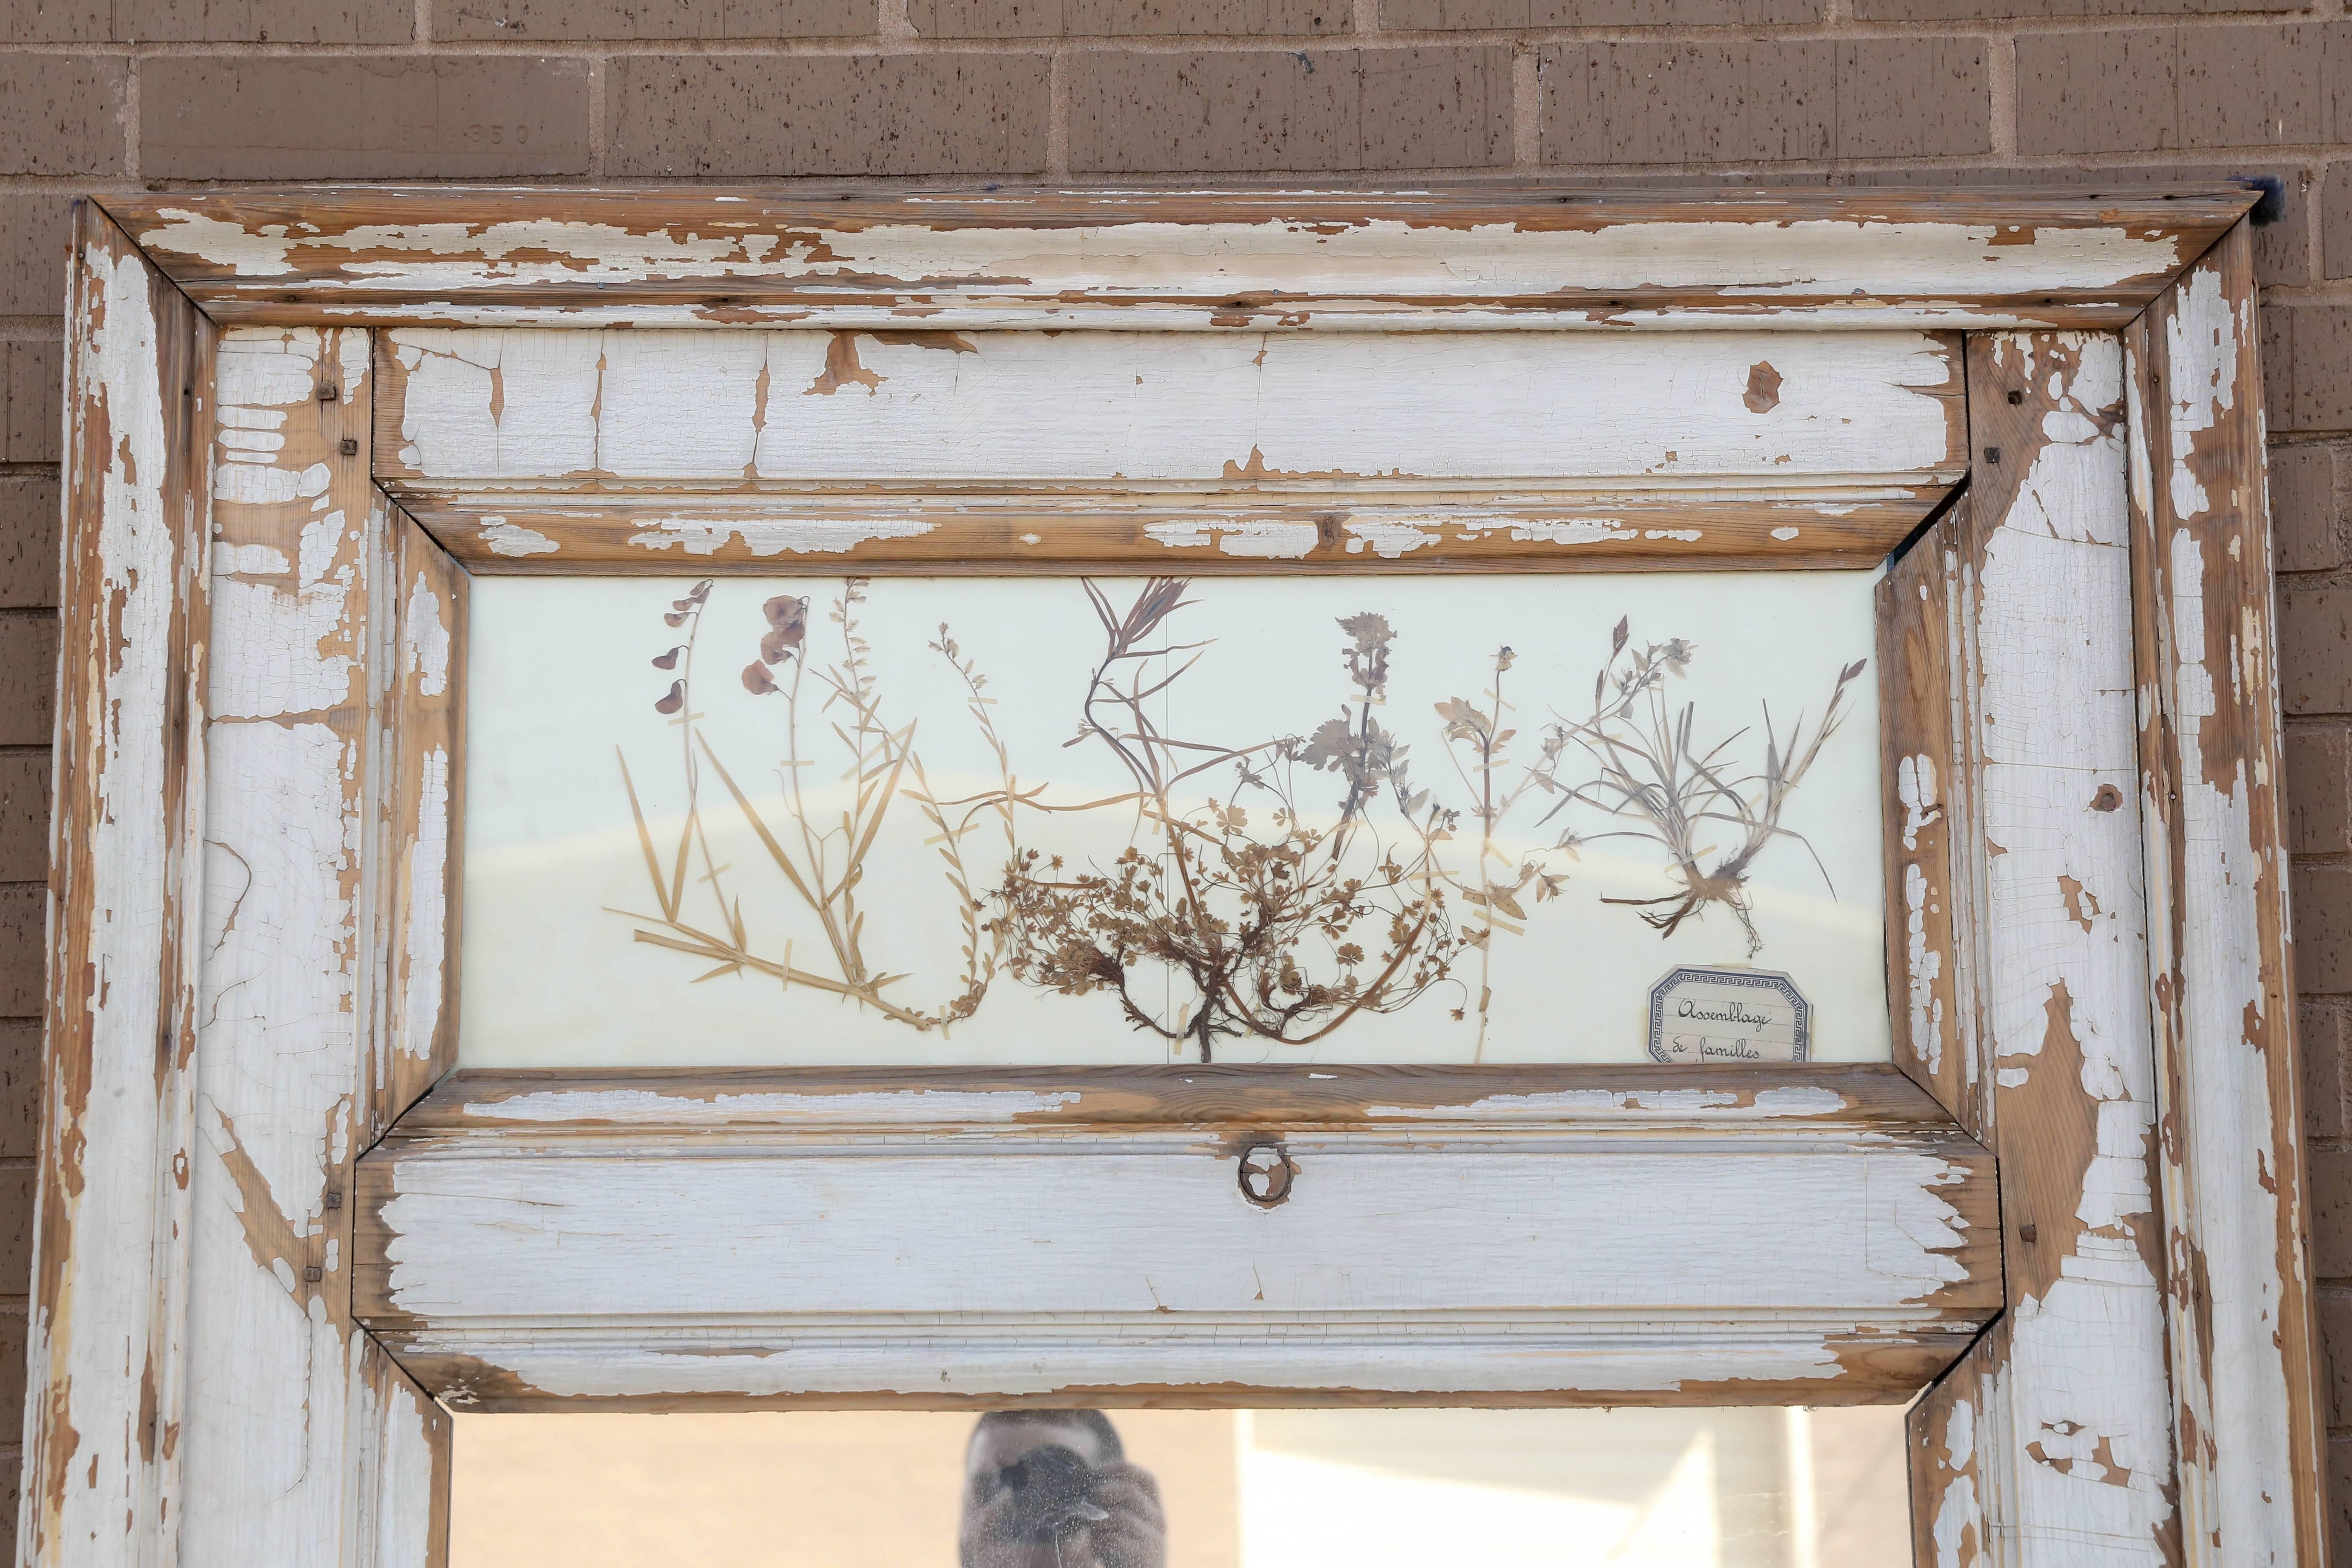 French pressed herb trumeau mirror from the 19th century.